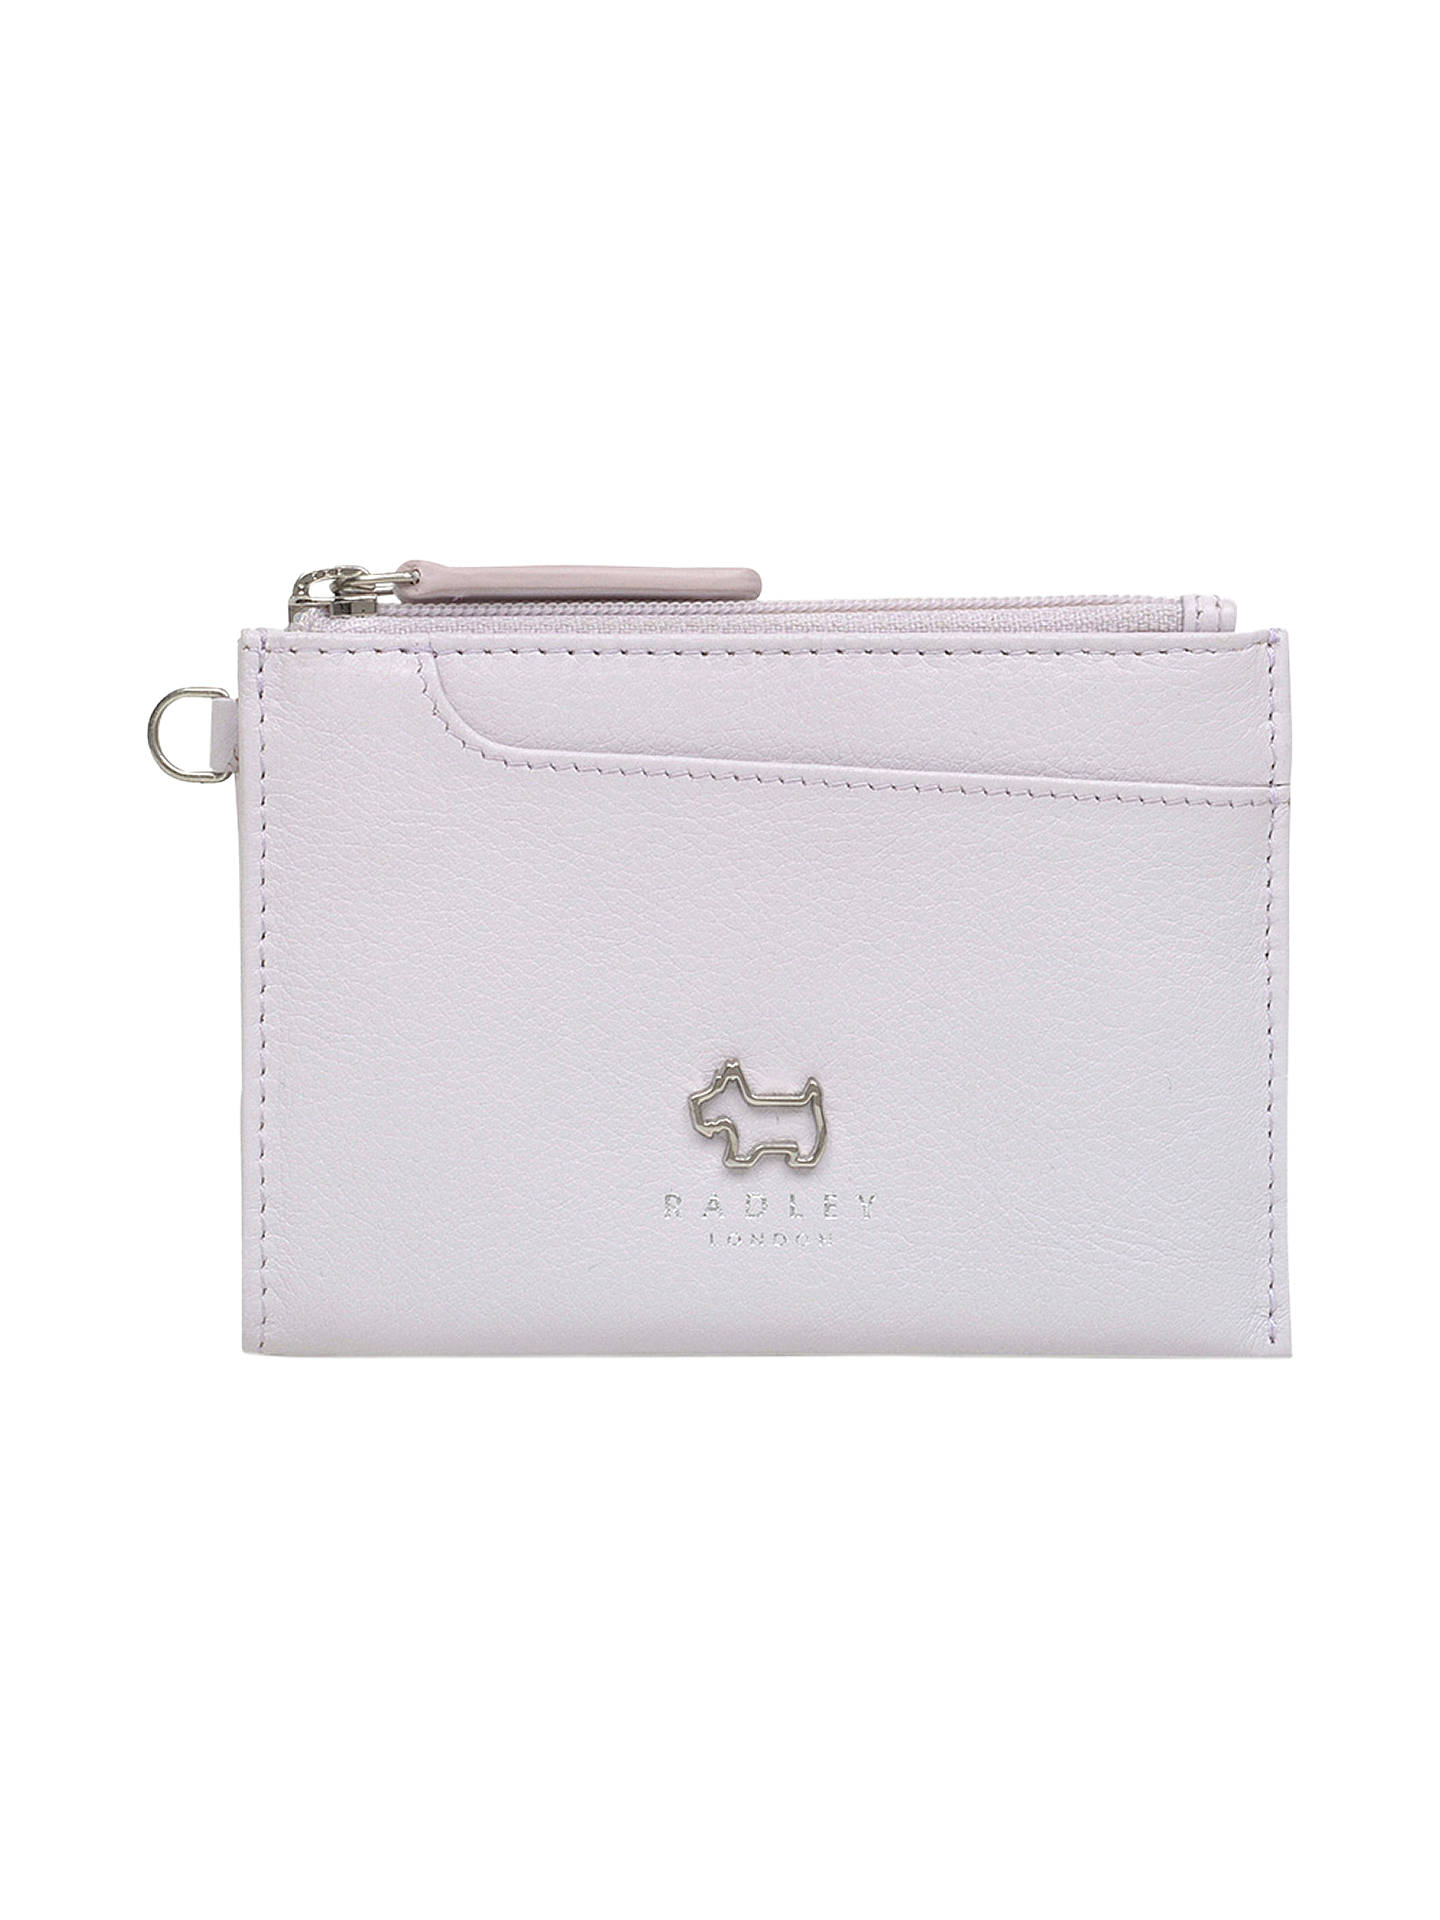 Radley Pockets Leather Small Coin Purse at John Lewis & Partners